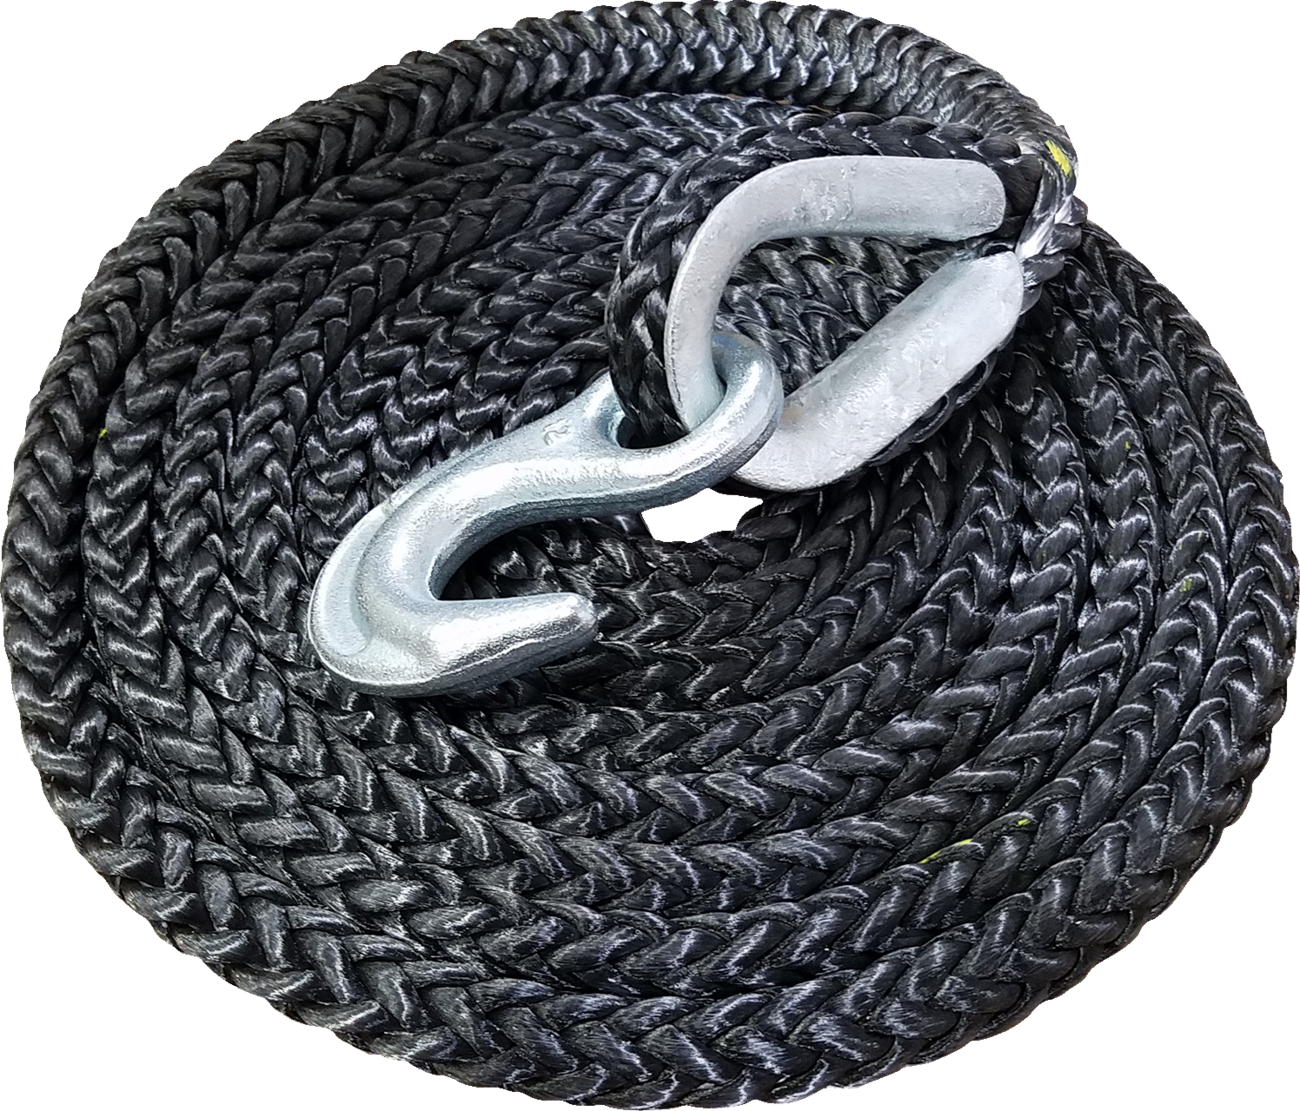 KFI PRODUCTS Replacement Rope - Tiger Tail - Black 101121-R